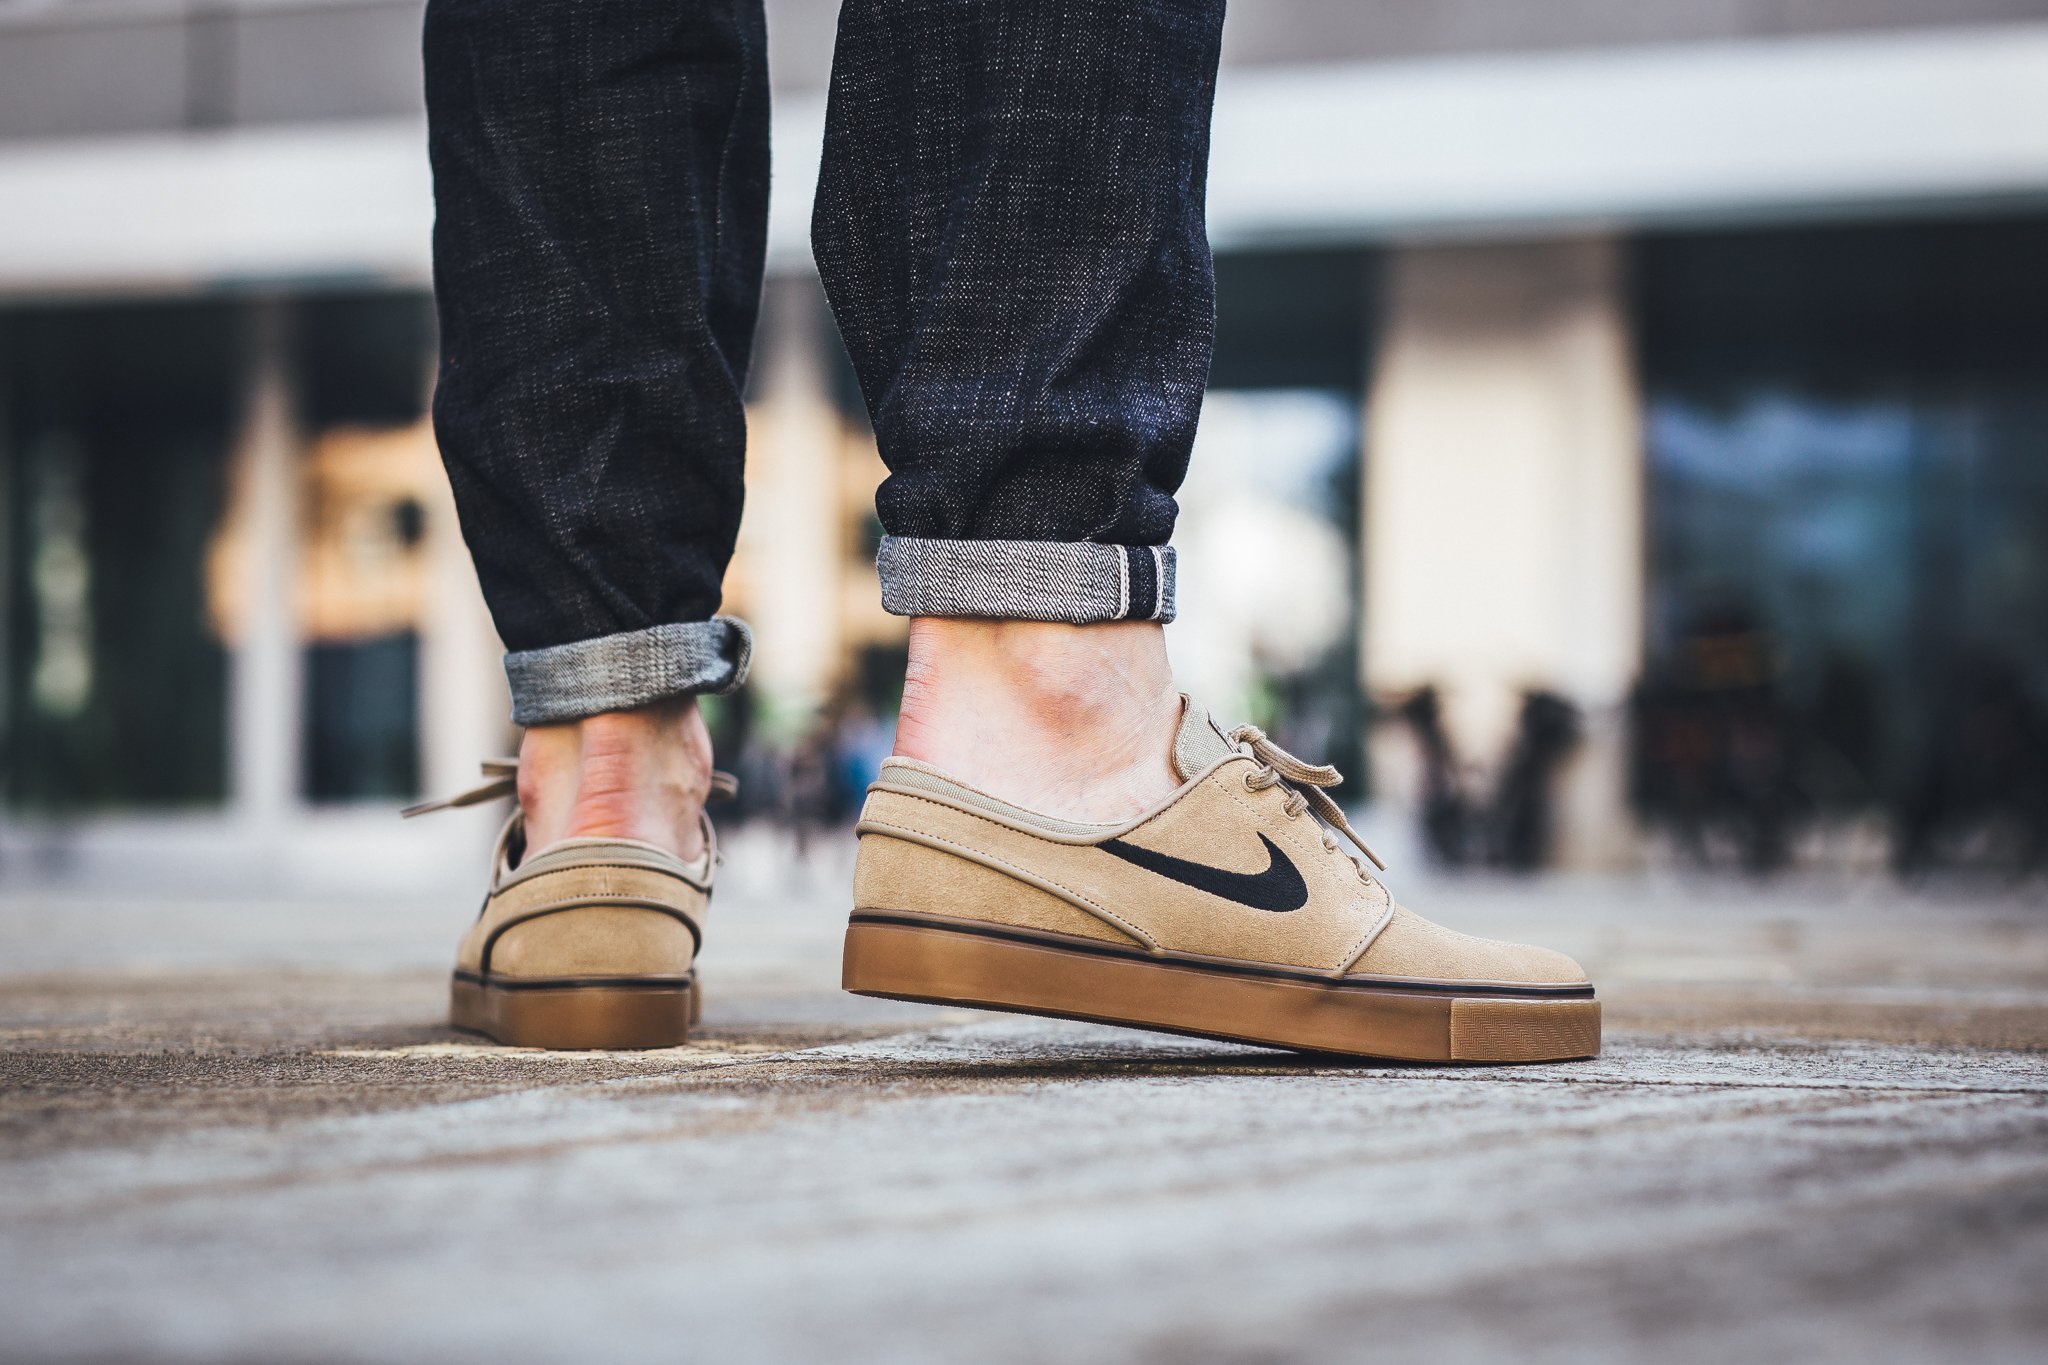 on Twitter: "Nike Zoom Stefan Janoski - Khaki/Black-Gum Light Brown Available now at Titolo HERE https://t.co/0QF9tIxkJY https://t.co/oD6h2dGlXw" /